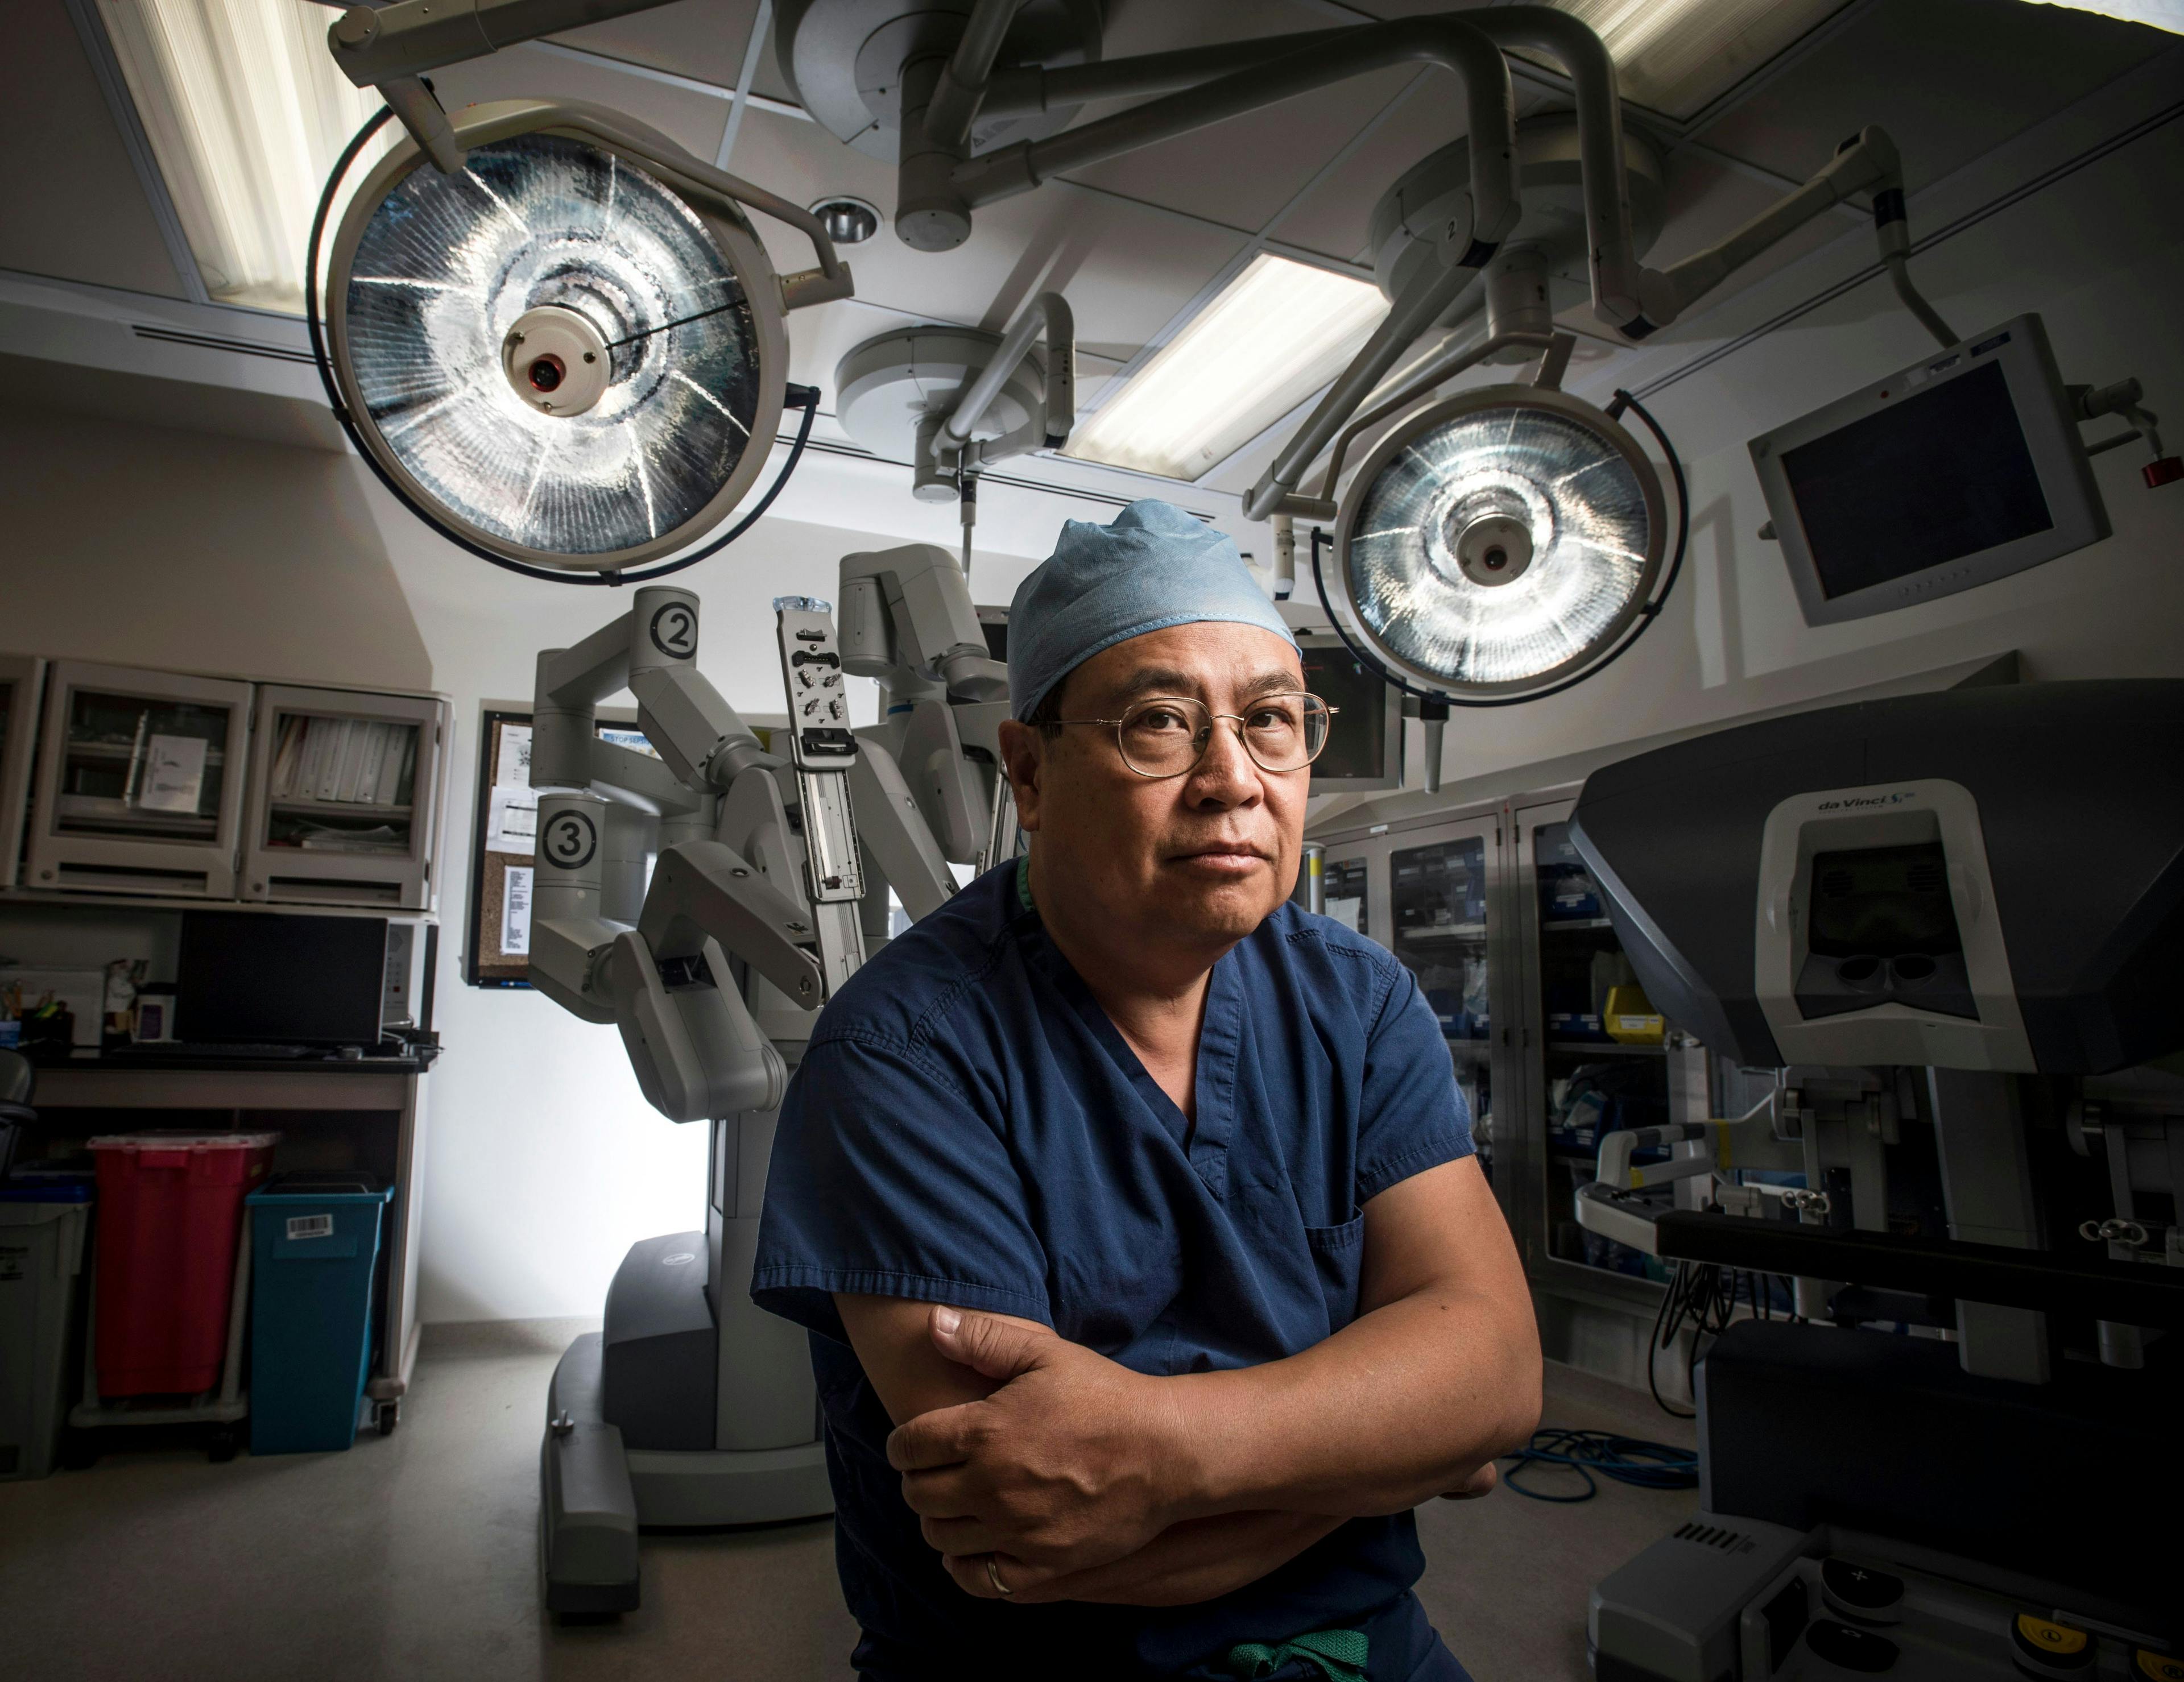 Image of Dr. Yuman Fong with the robotic technology behind him | Photo credit: City of Hope